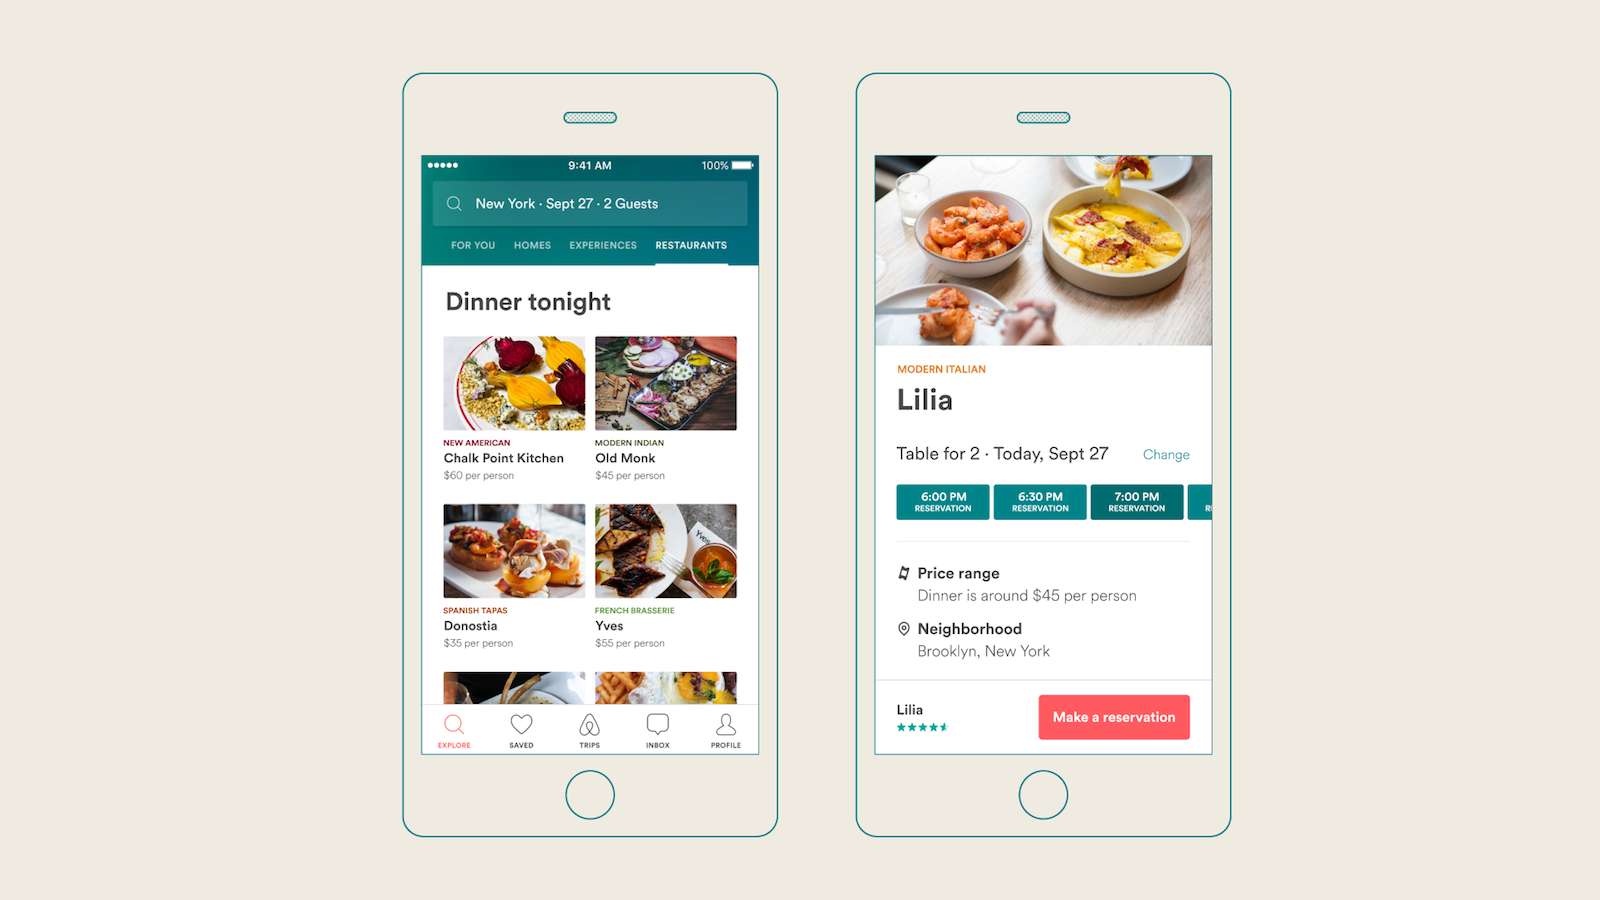 AirBNB Introduces Restaurant Reservations